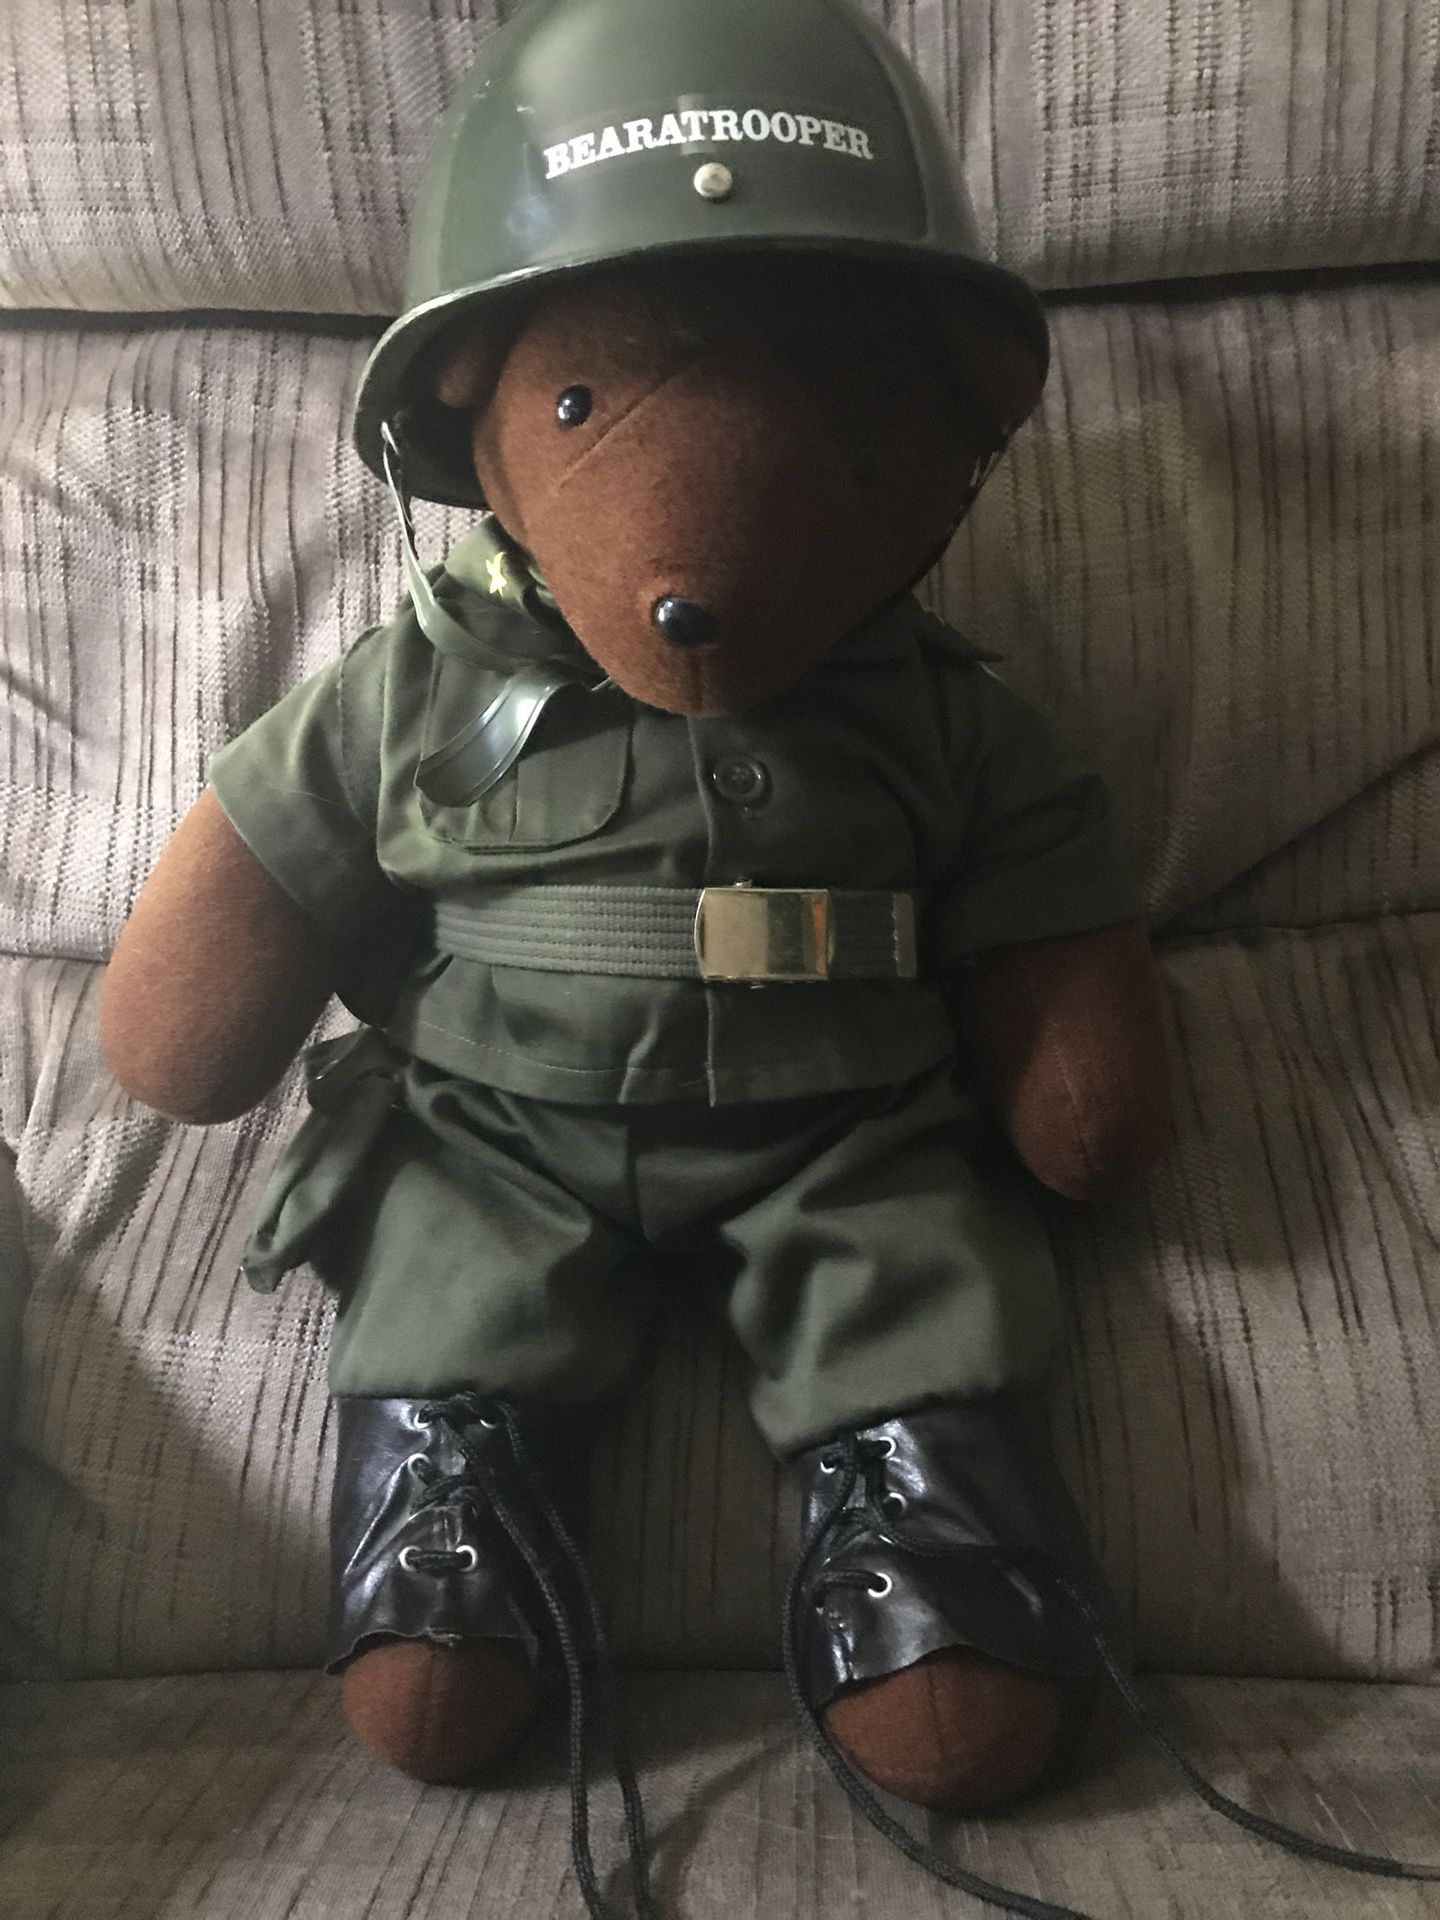 Bearatrooper Bear in Paratroopers suits